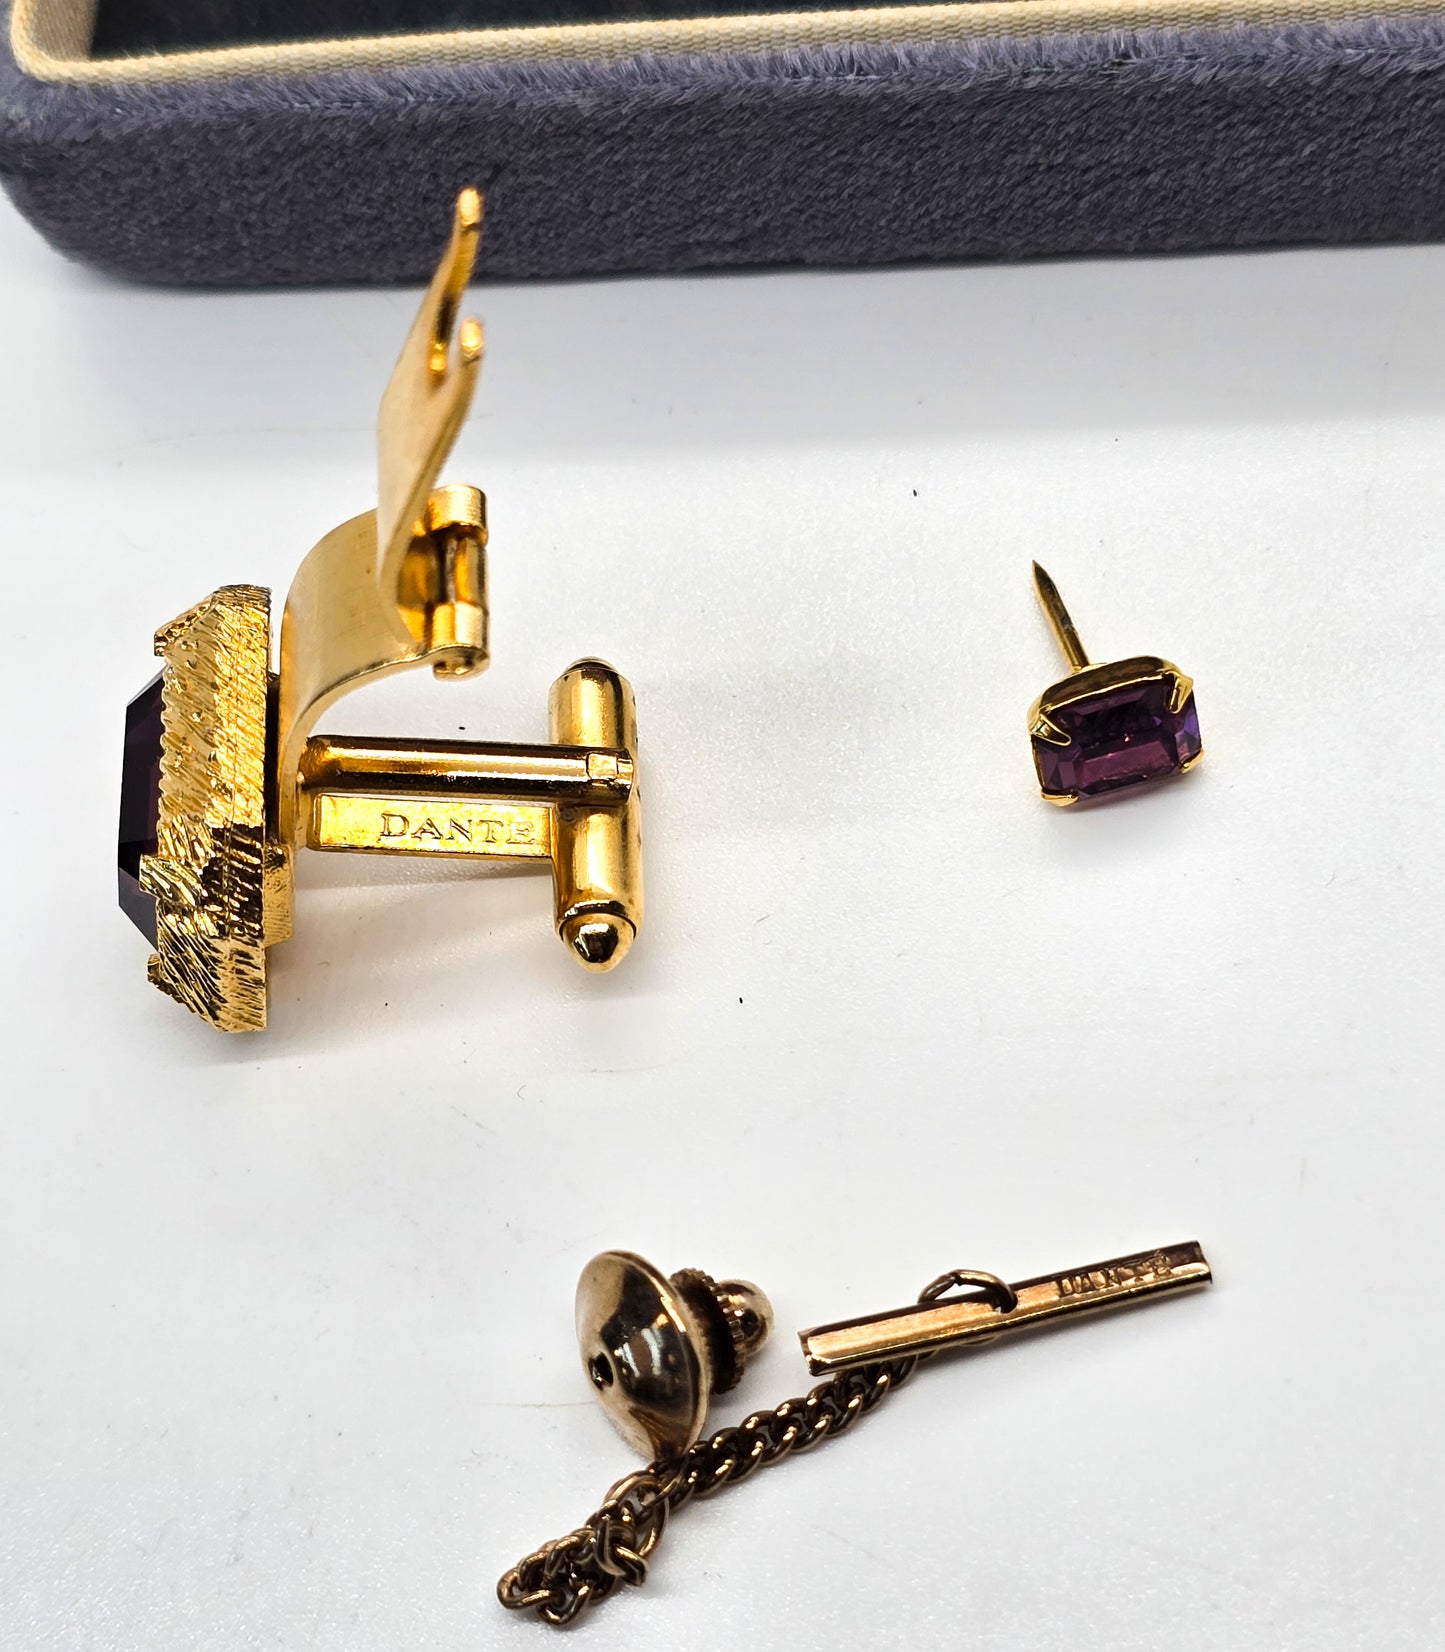 Dante Purple and gold toned vintage cufflinks and tie tack set in original box